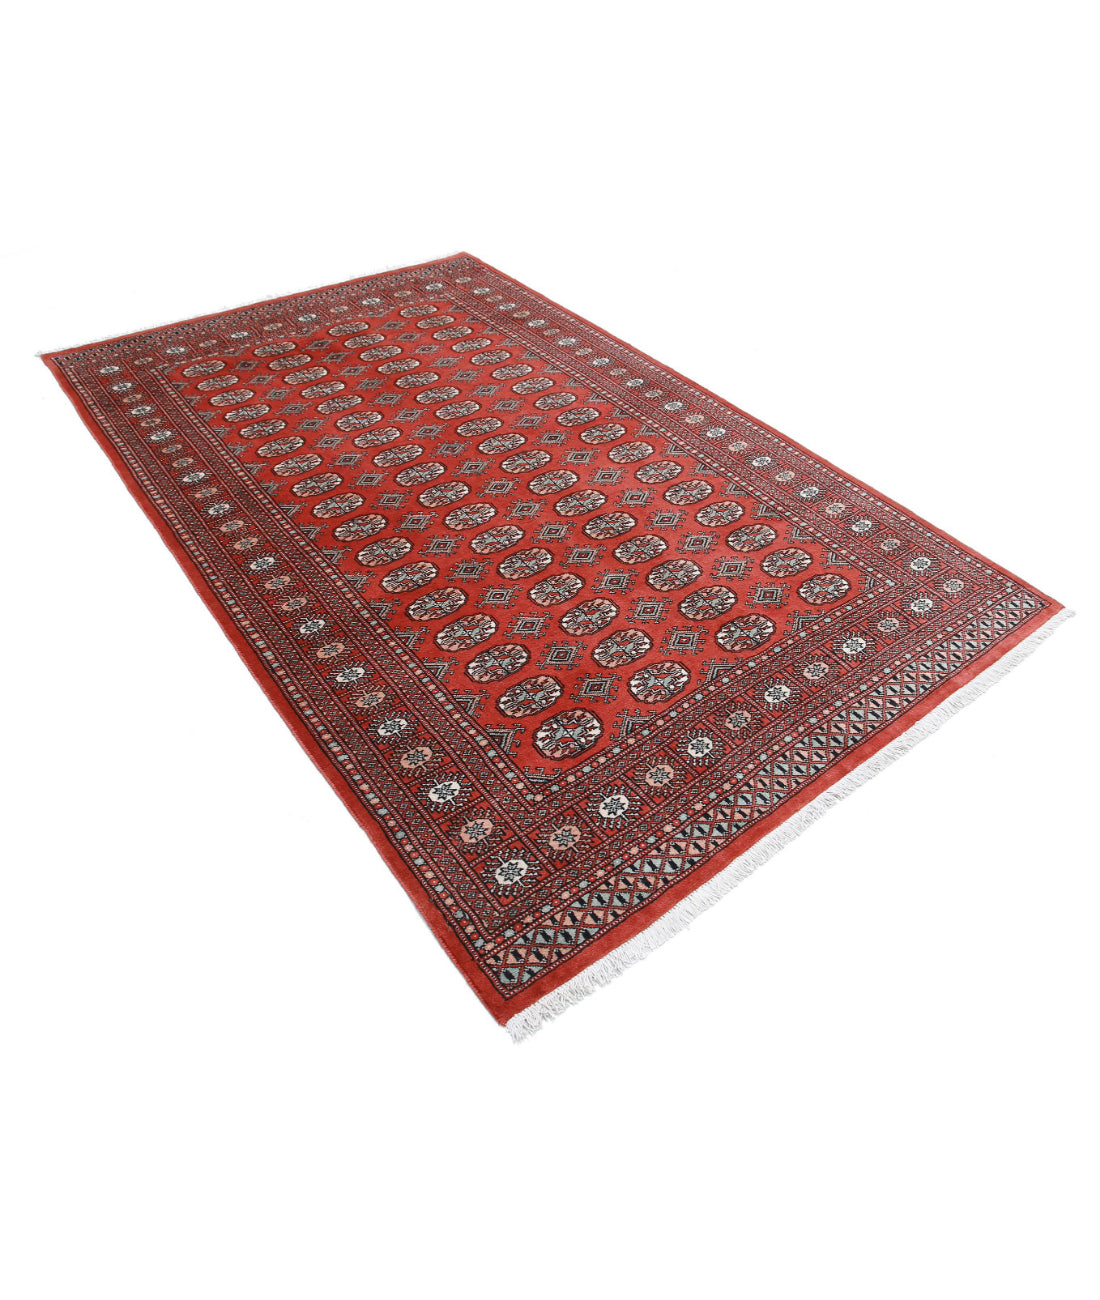 Hand Knotted Tribal Bokhara Wool Rug - 5'1'' x 8'2'' 5'1'' x 8'2'' (153 X 245) / Red / Black